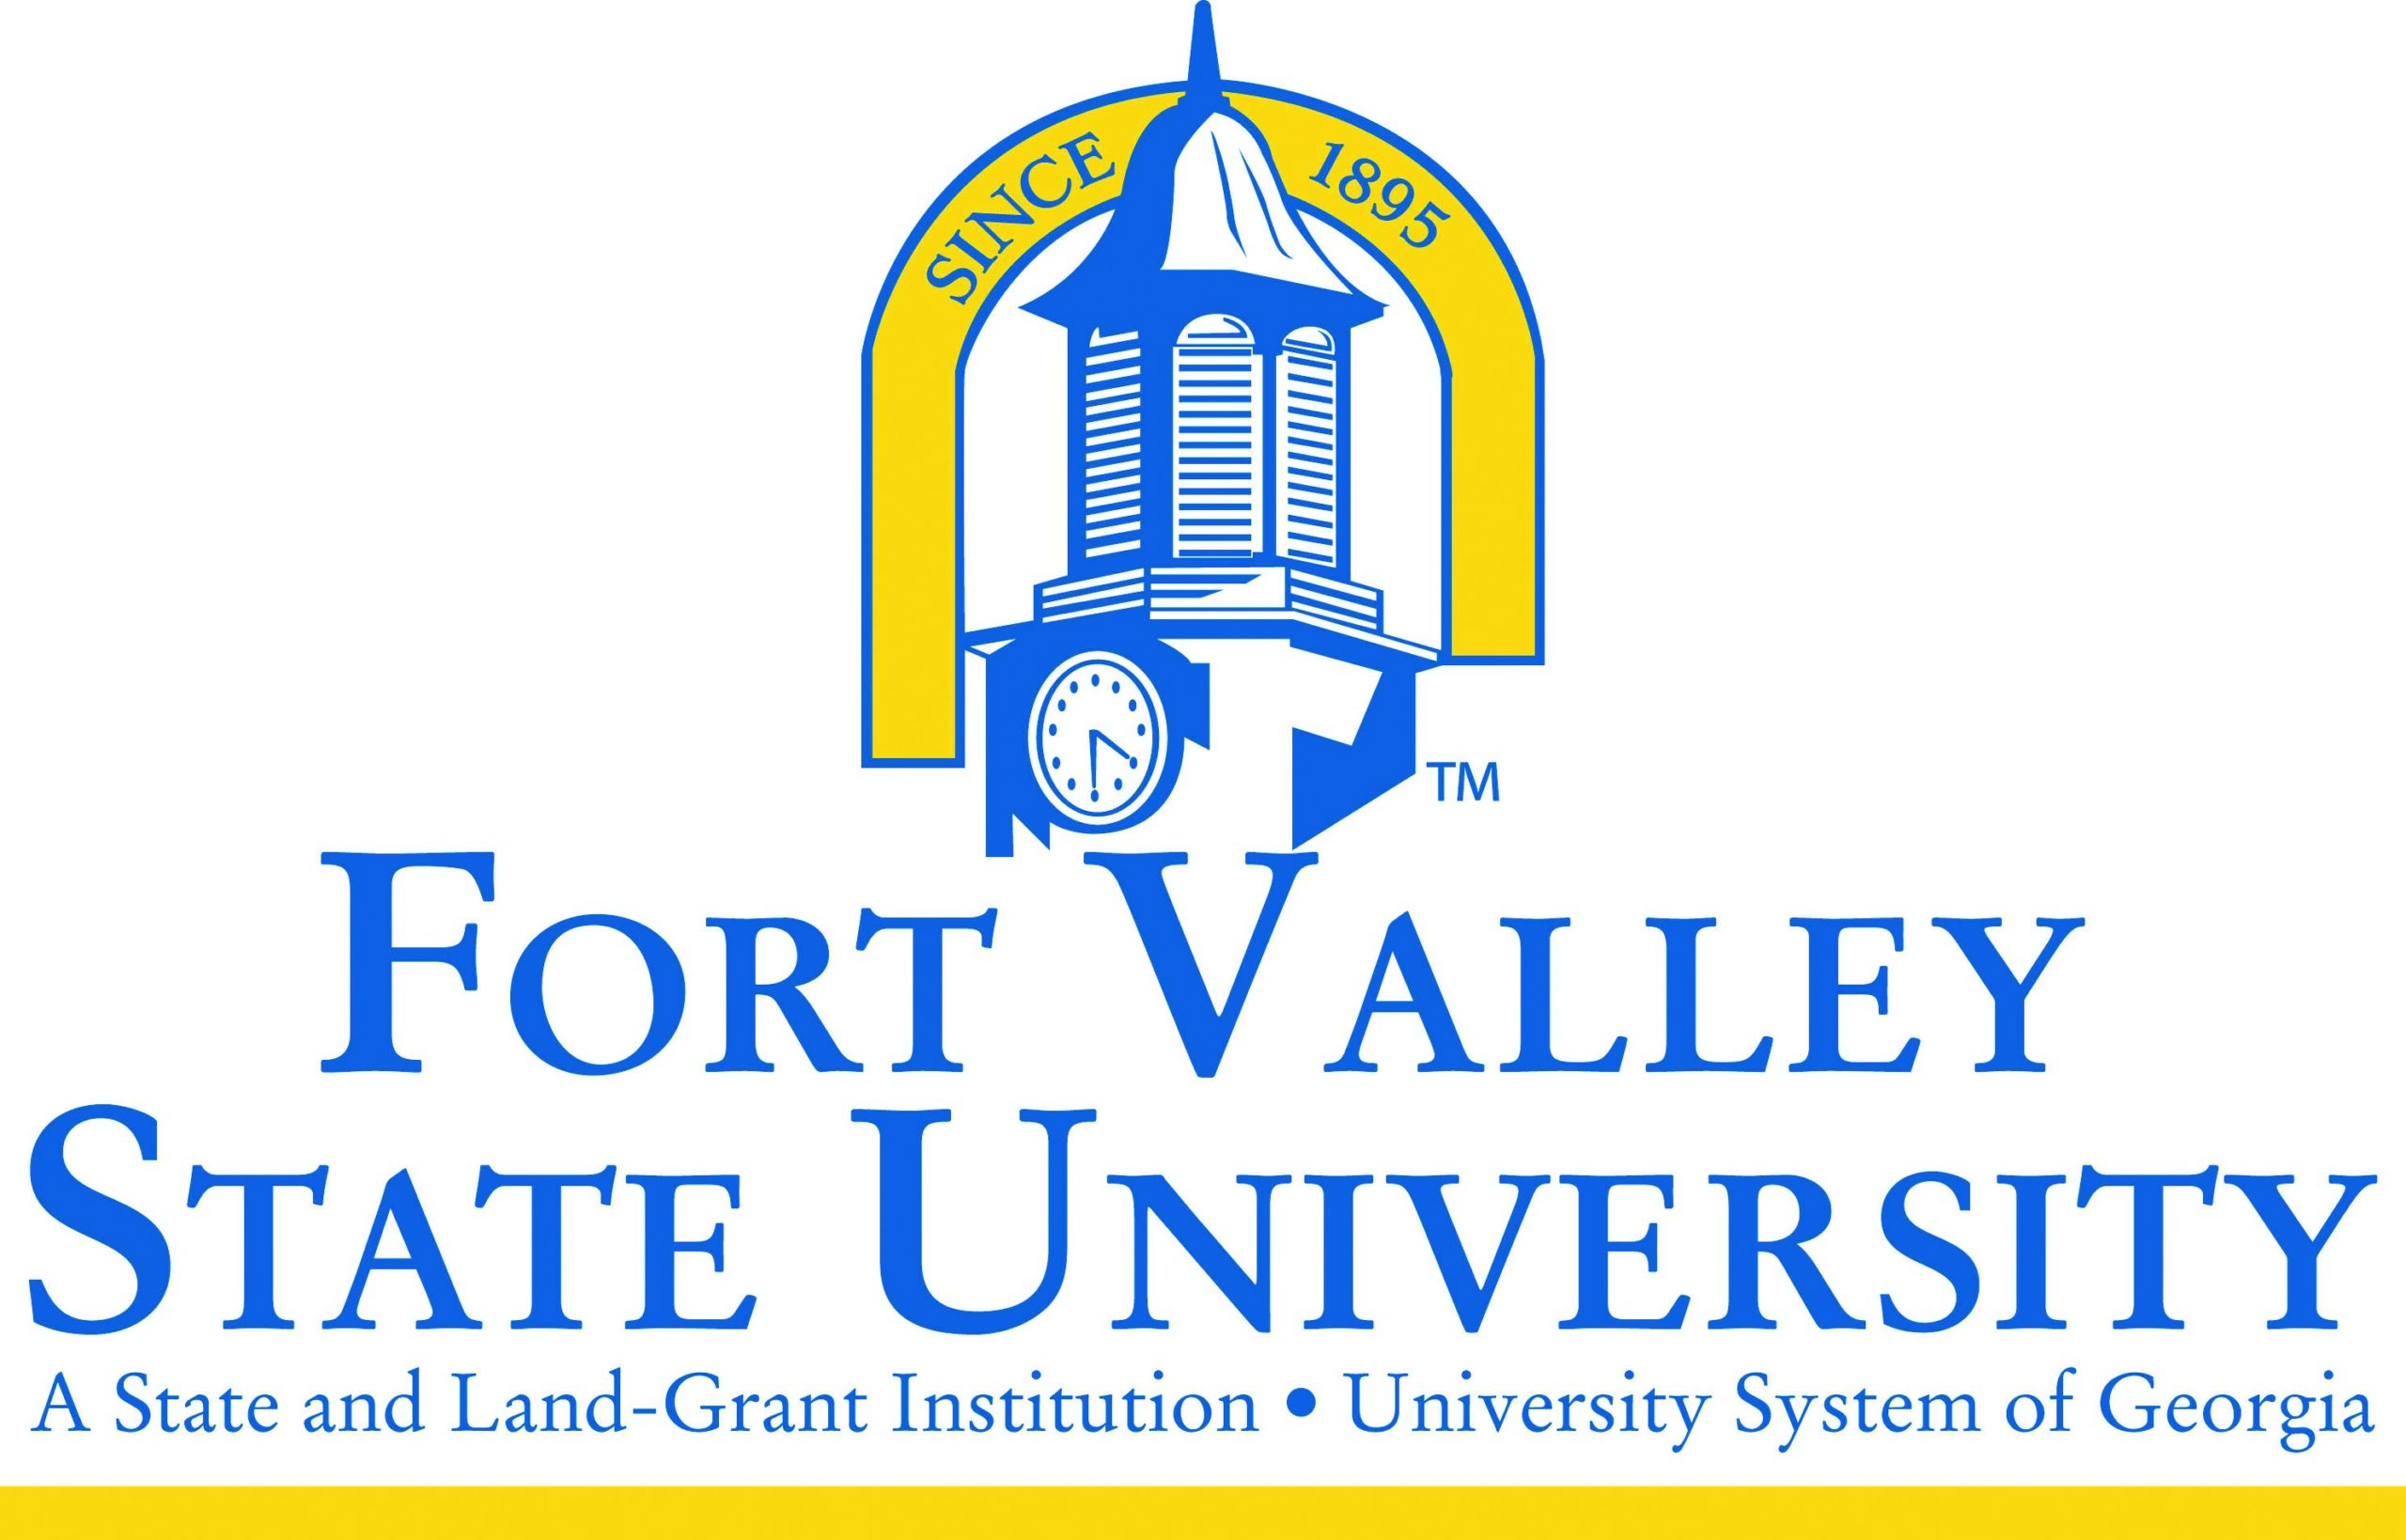 Fort Valley State